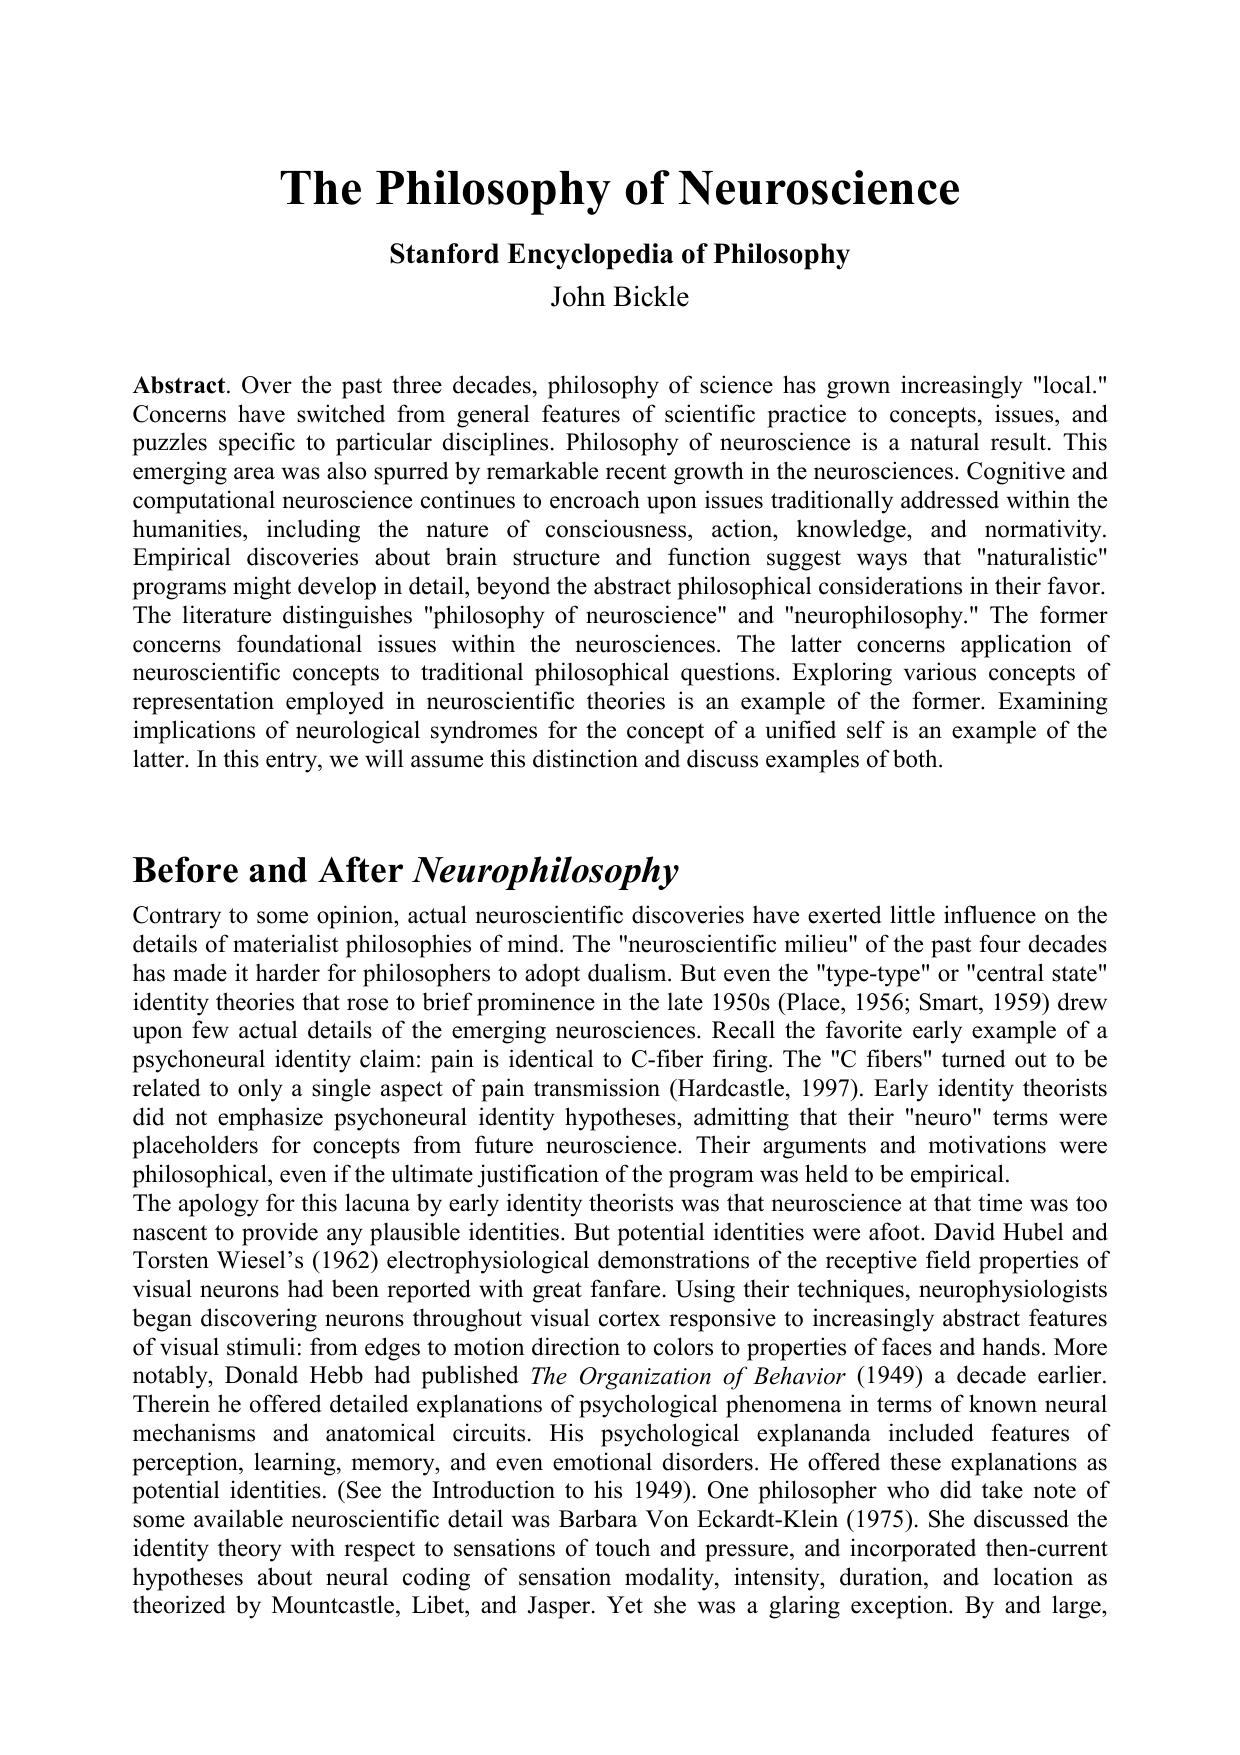 The Philosophy of Neuroscience - Paper